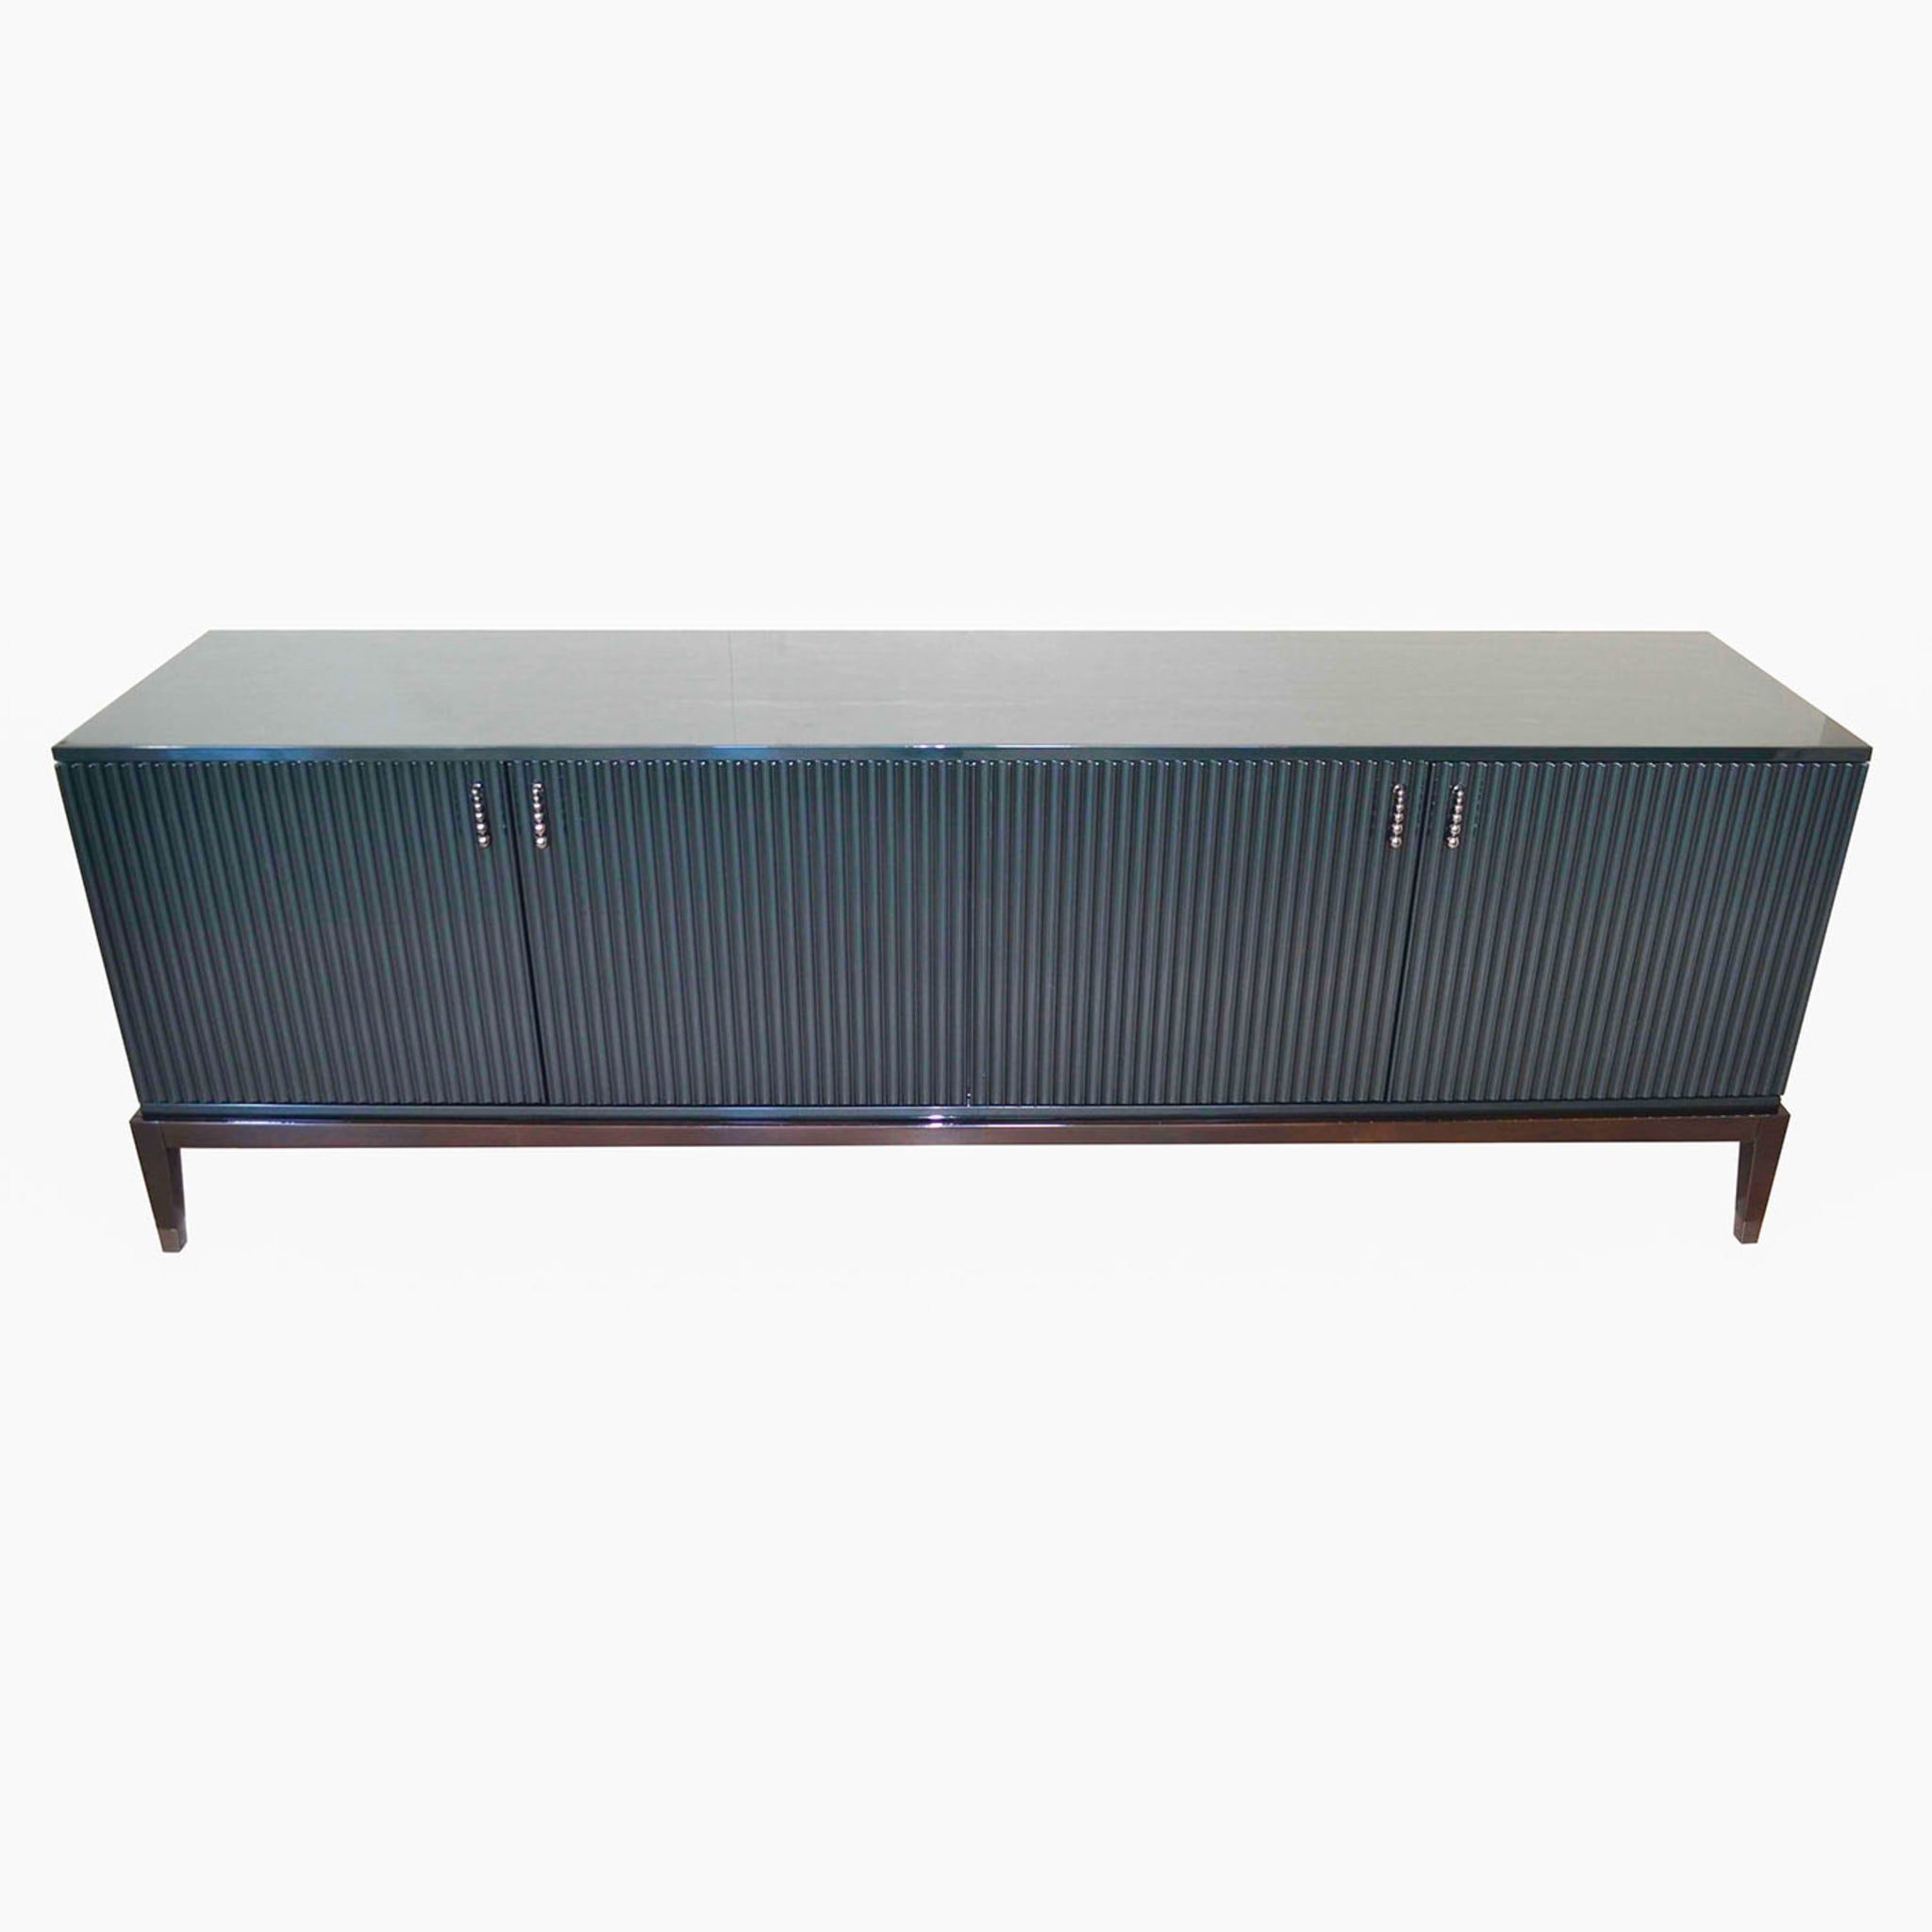 Italian Sideboard in Glossy Green Emerald Lacquered  - Alternative view 2